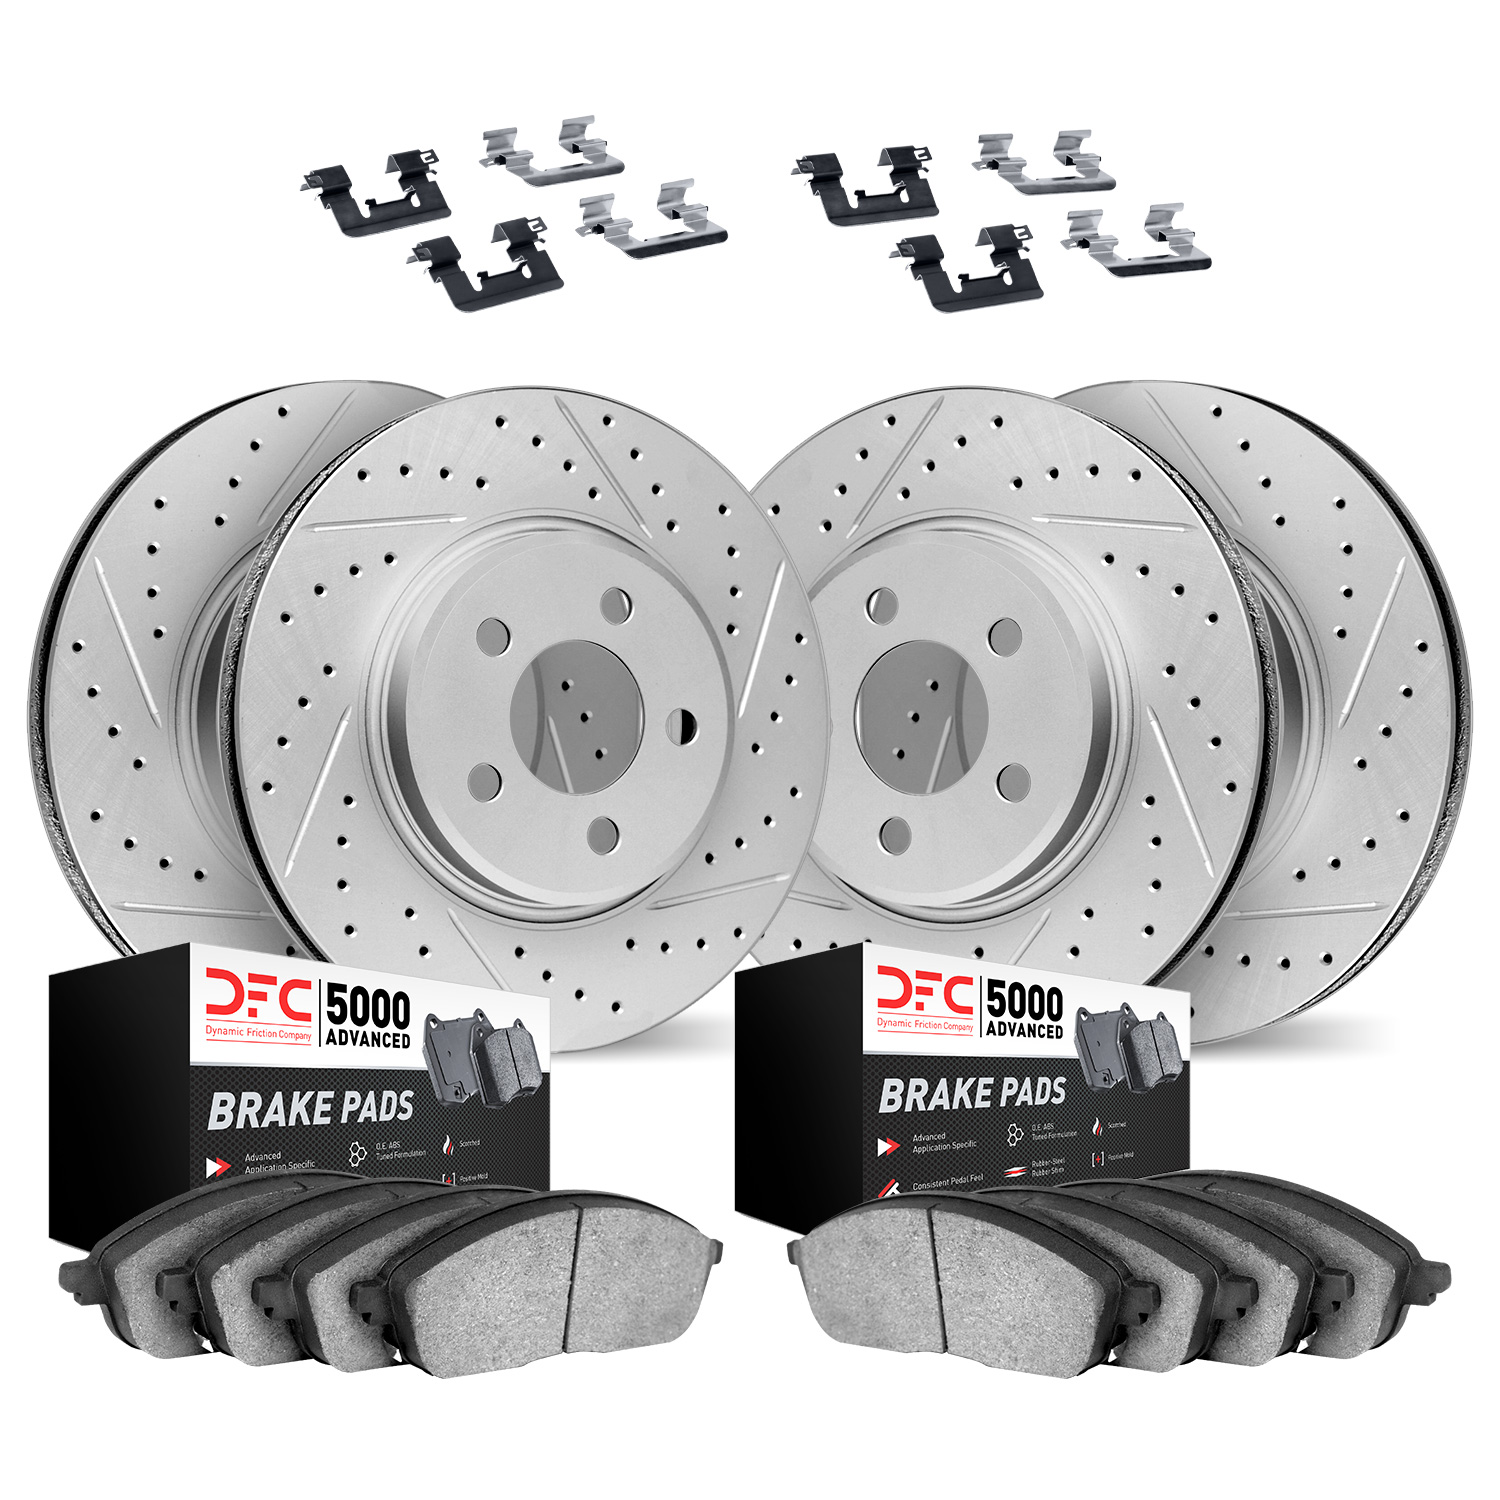 2514-31025 Geoperformance Drilled/Slotted Rotors w/5000 Advanced Brake Pads Kit & Hardware, 2009-2010 BMW, Position: Front and R